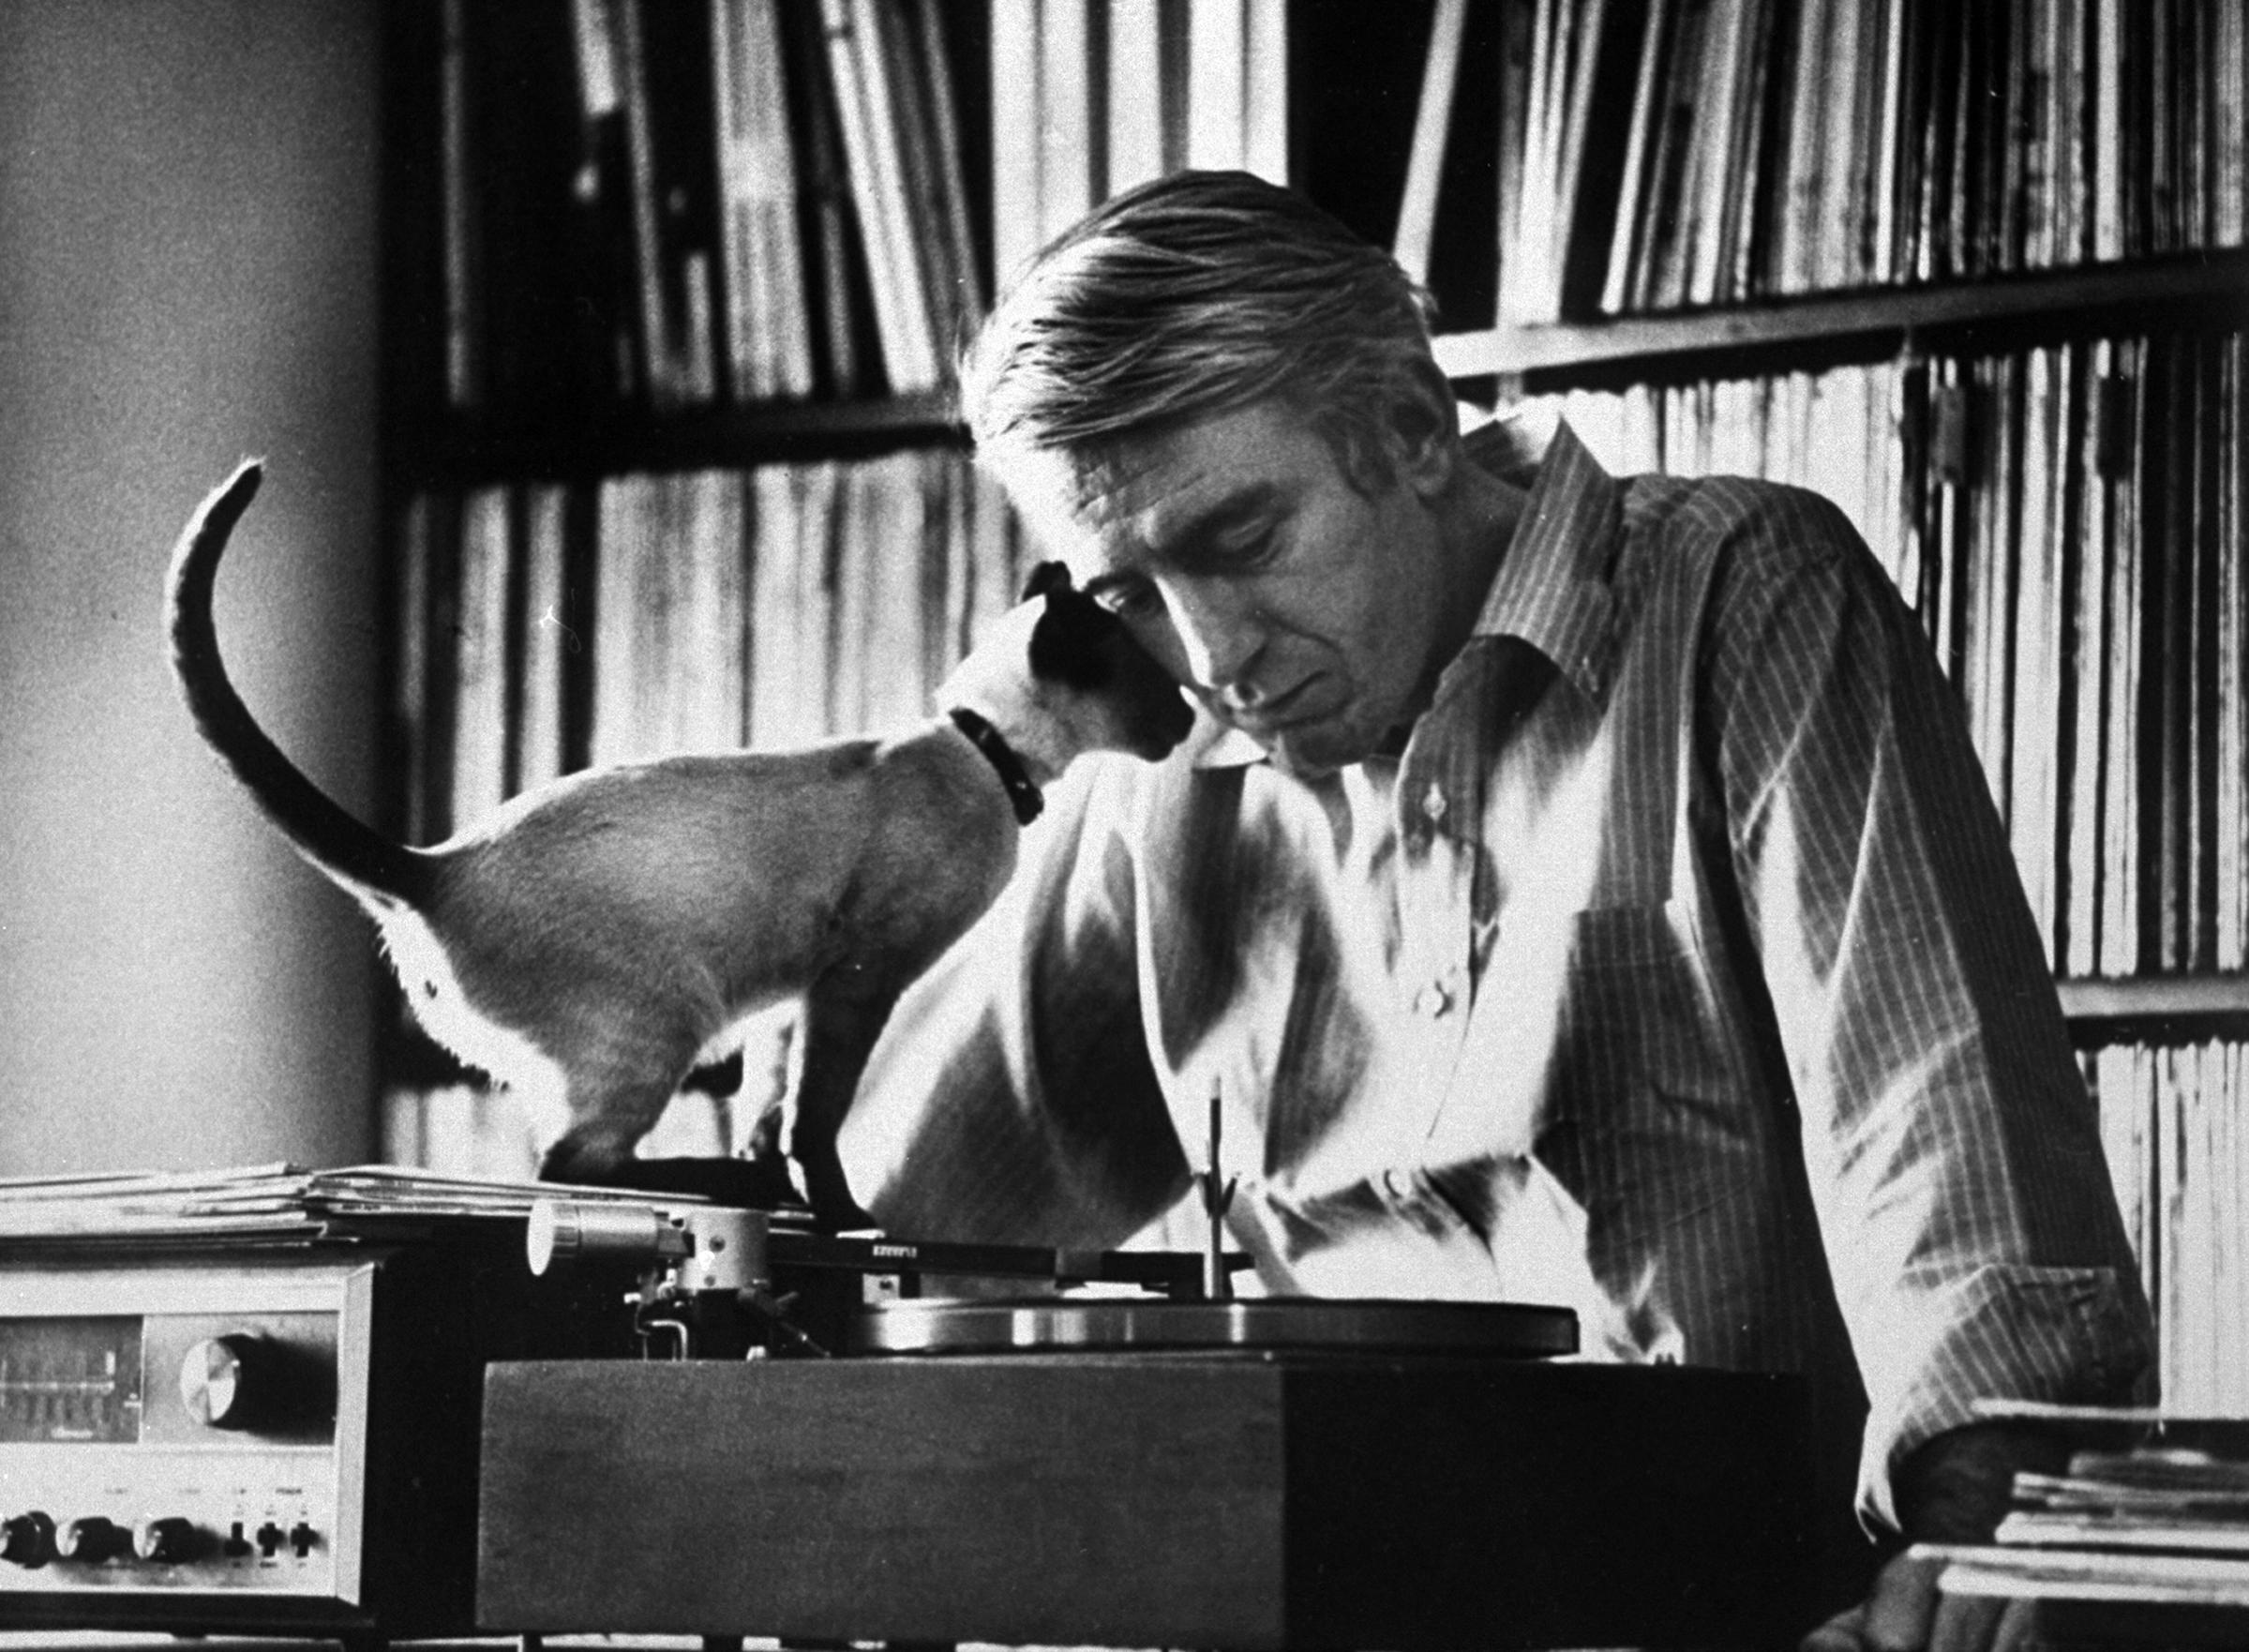 Poet Rod McKuen playing record on stereo set while pet Siamese cat nuzzles his face affectionately, 1967.